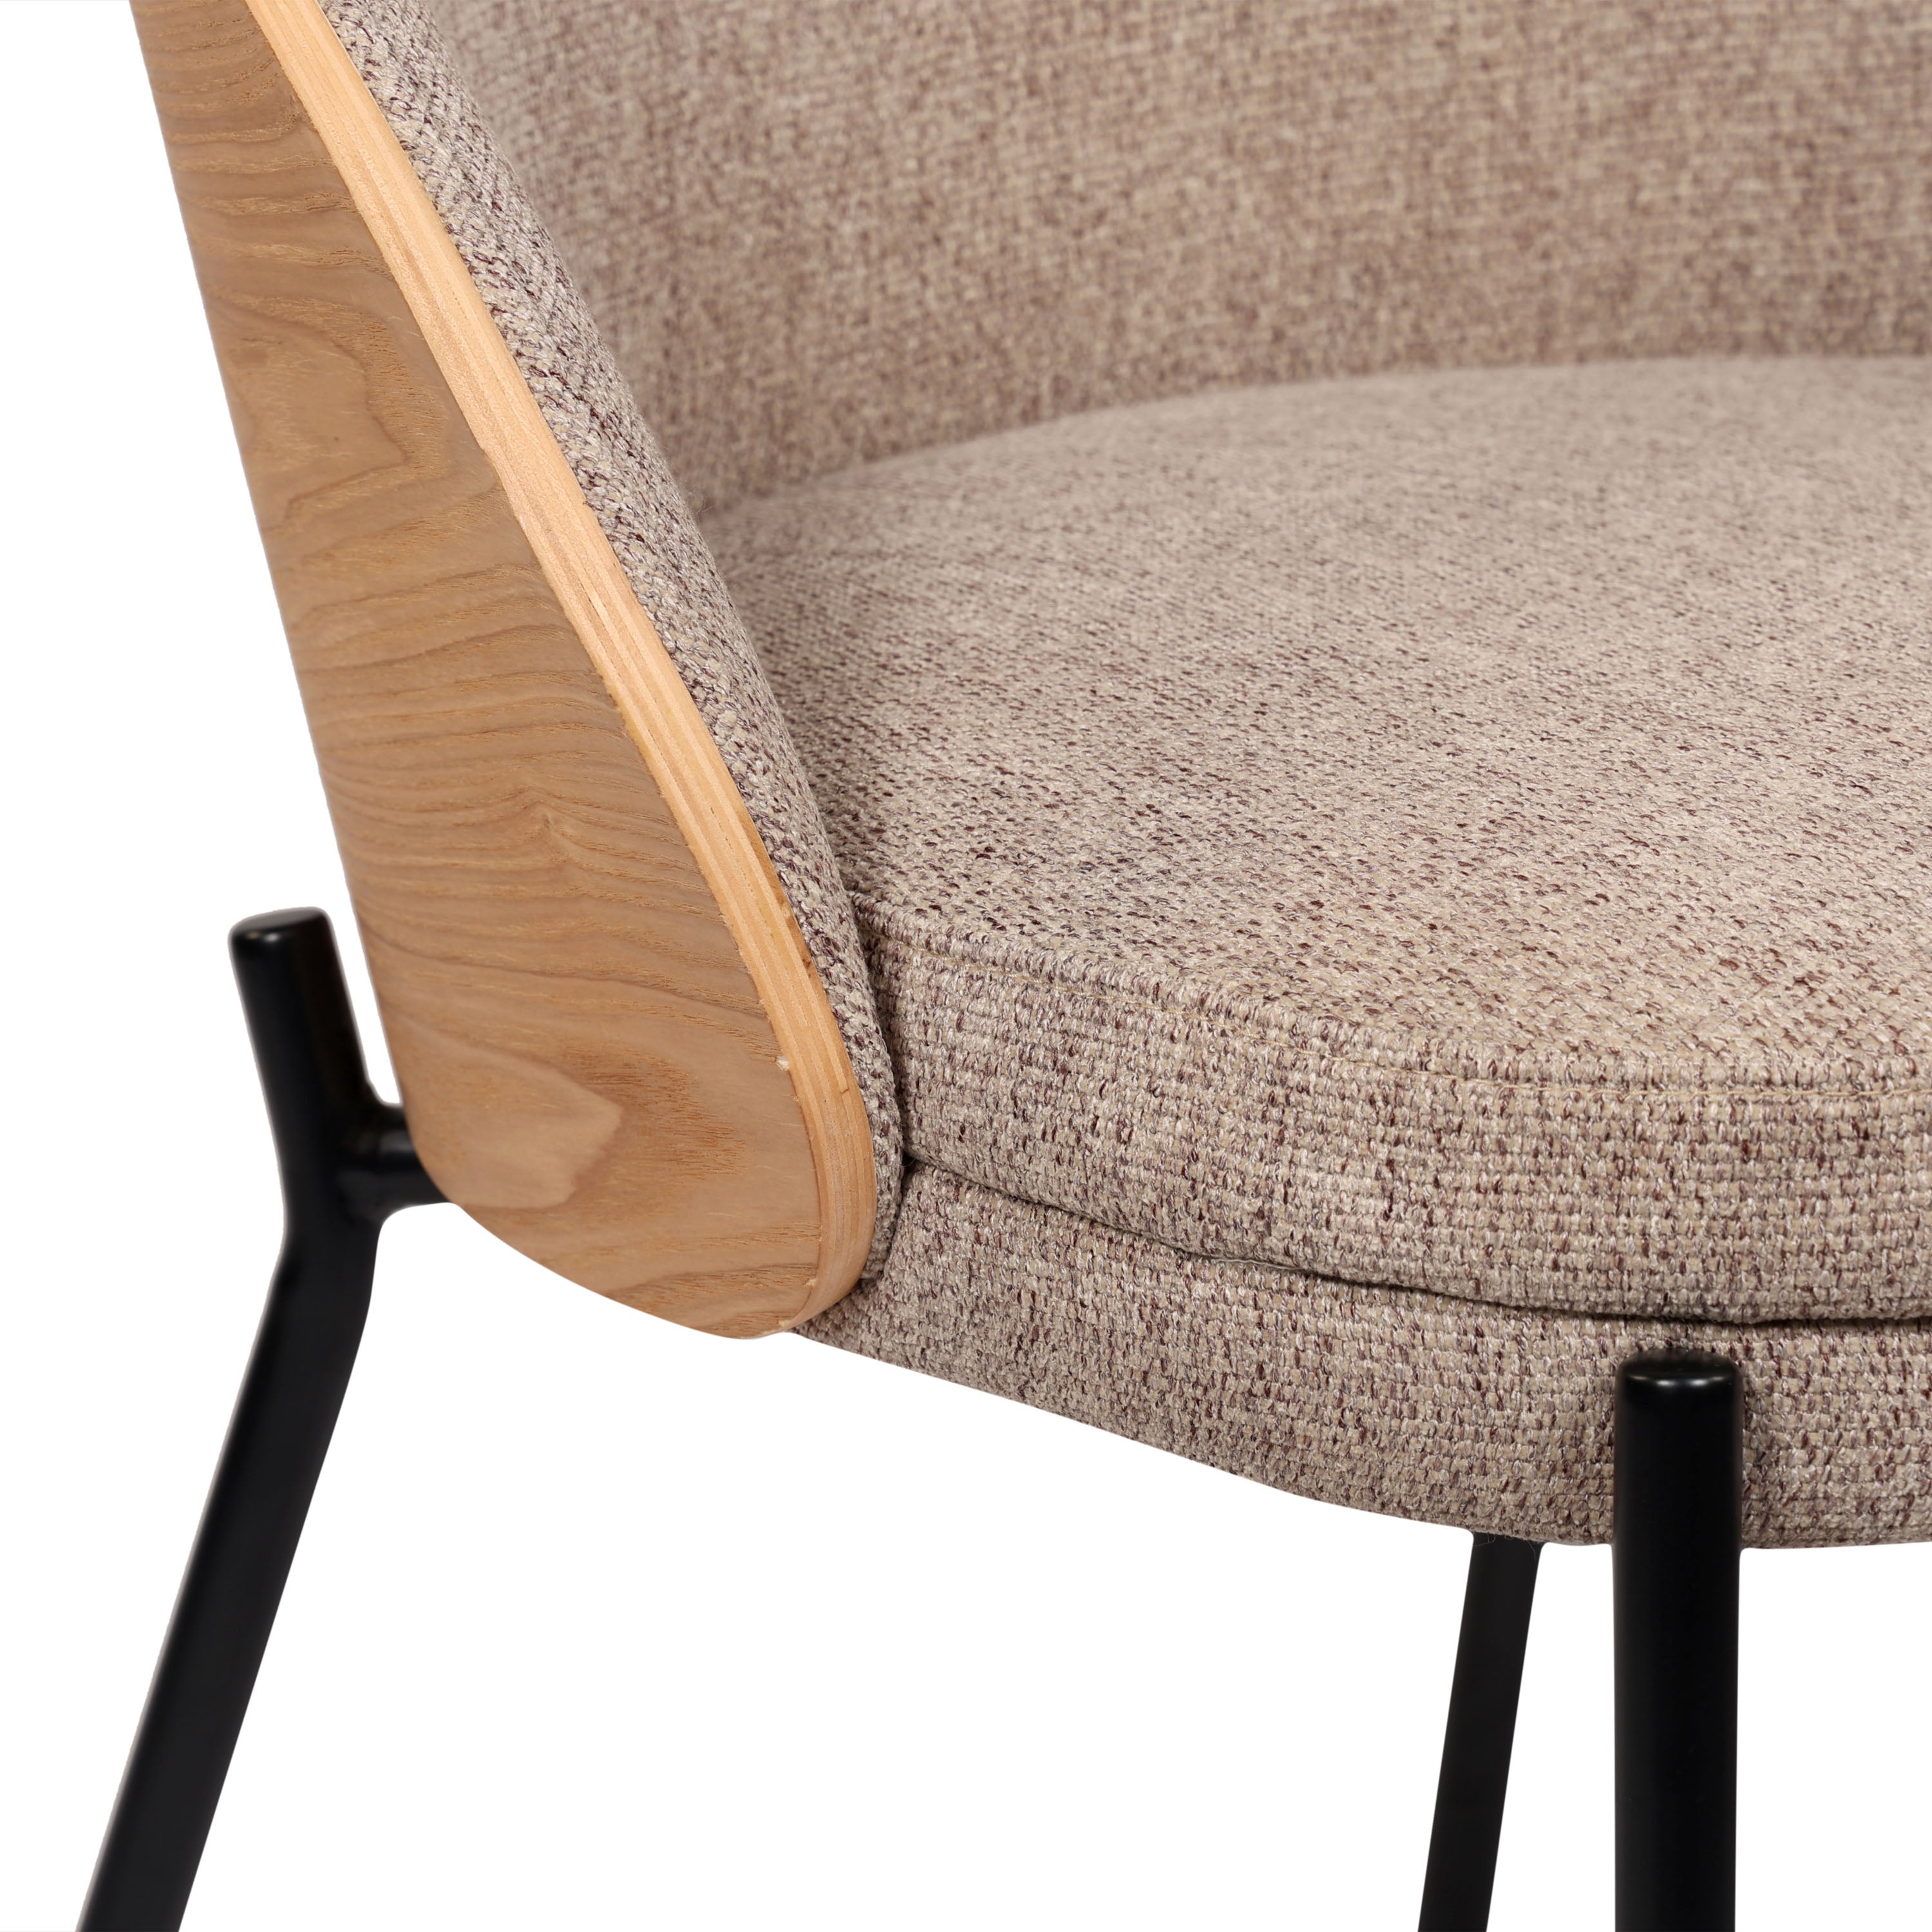 Hanoi Modern Fabric Upholstered Chair With Metal Legs - Beige